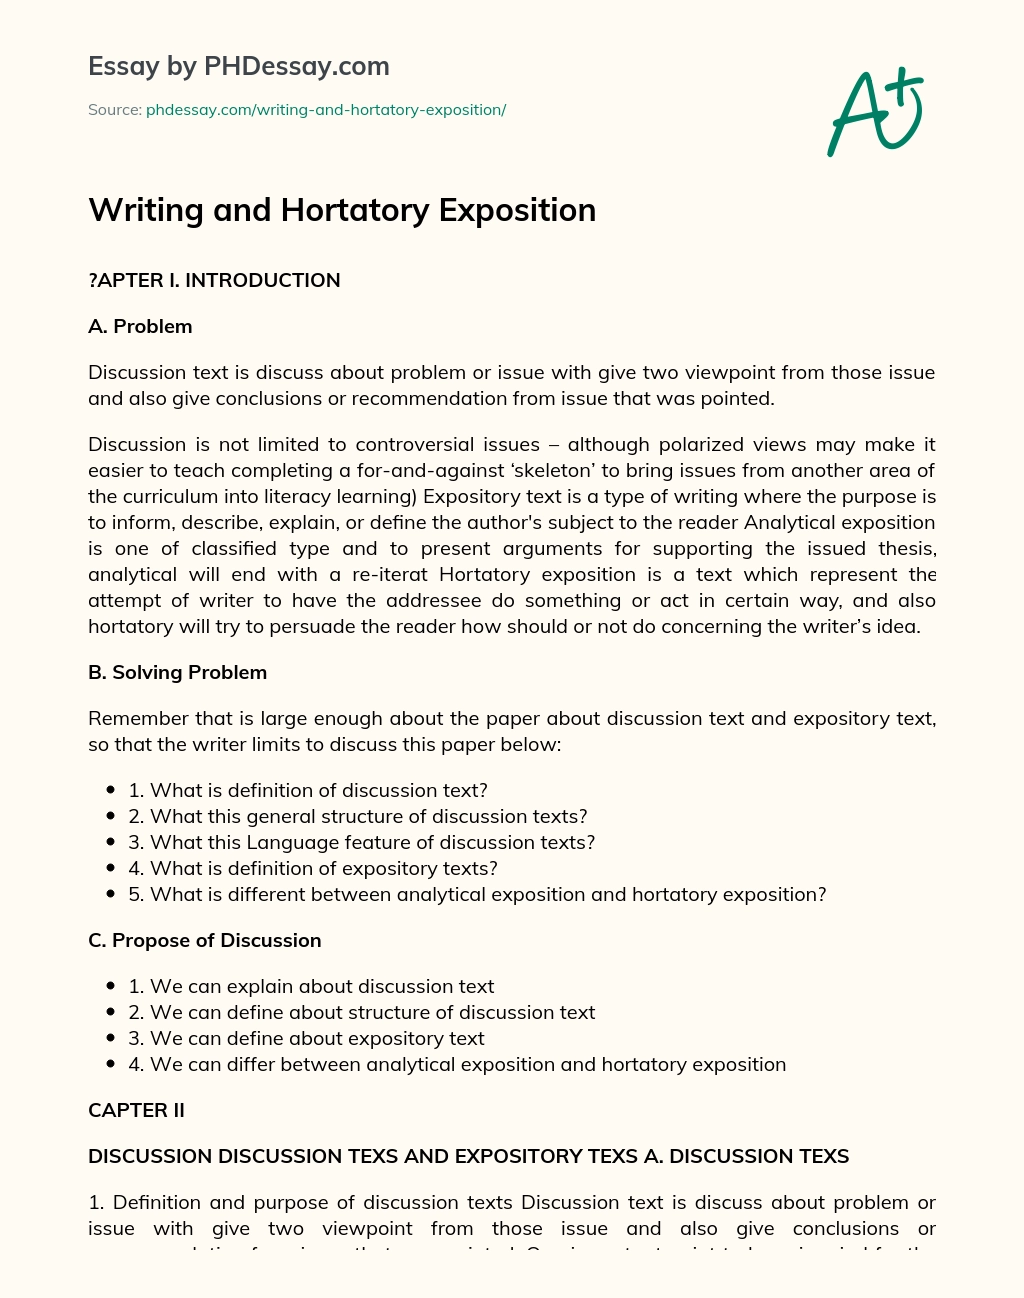 Writing and Hortatory Exposition essay